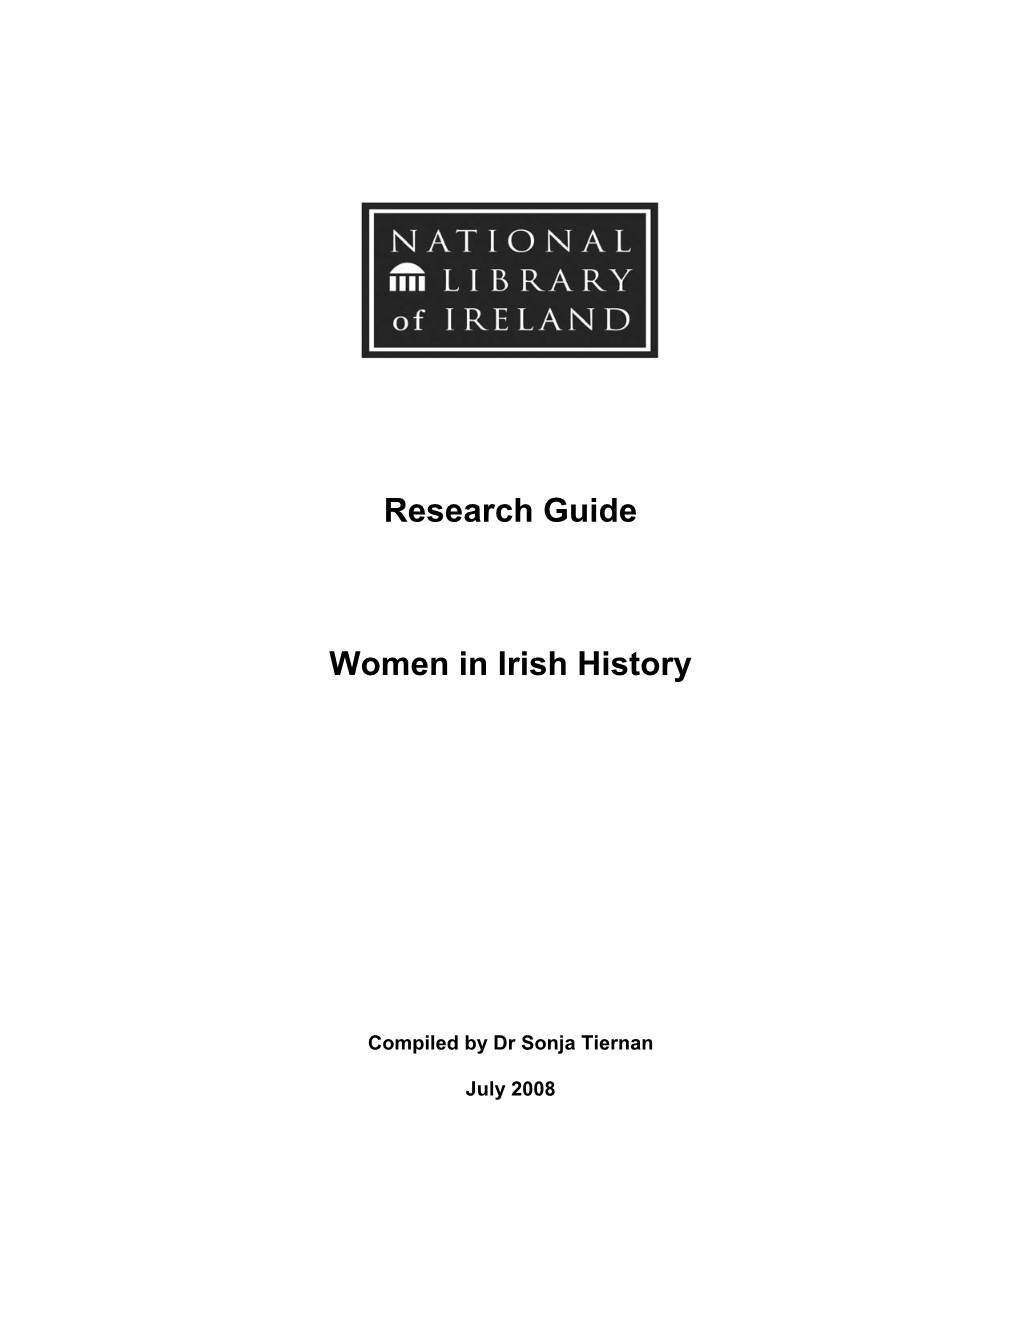 Research Guide on Women in Irish History